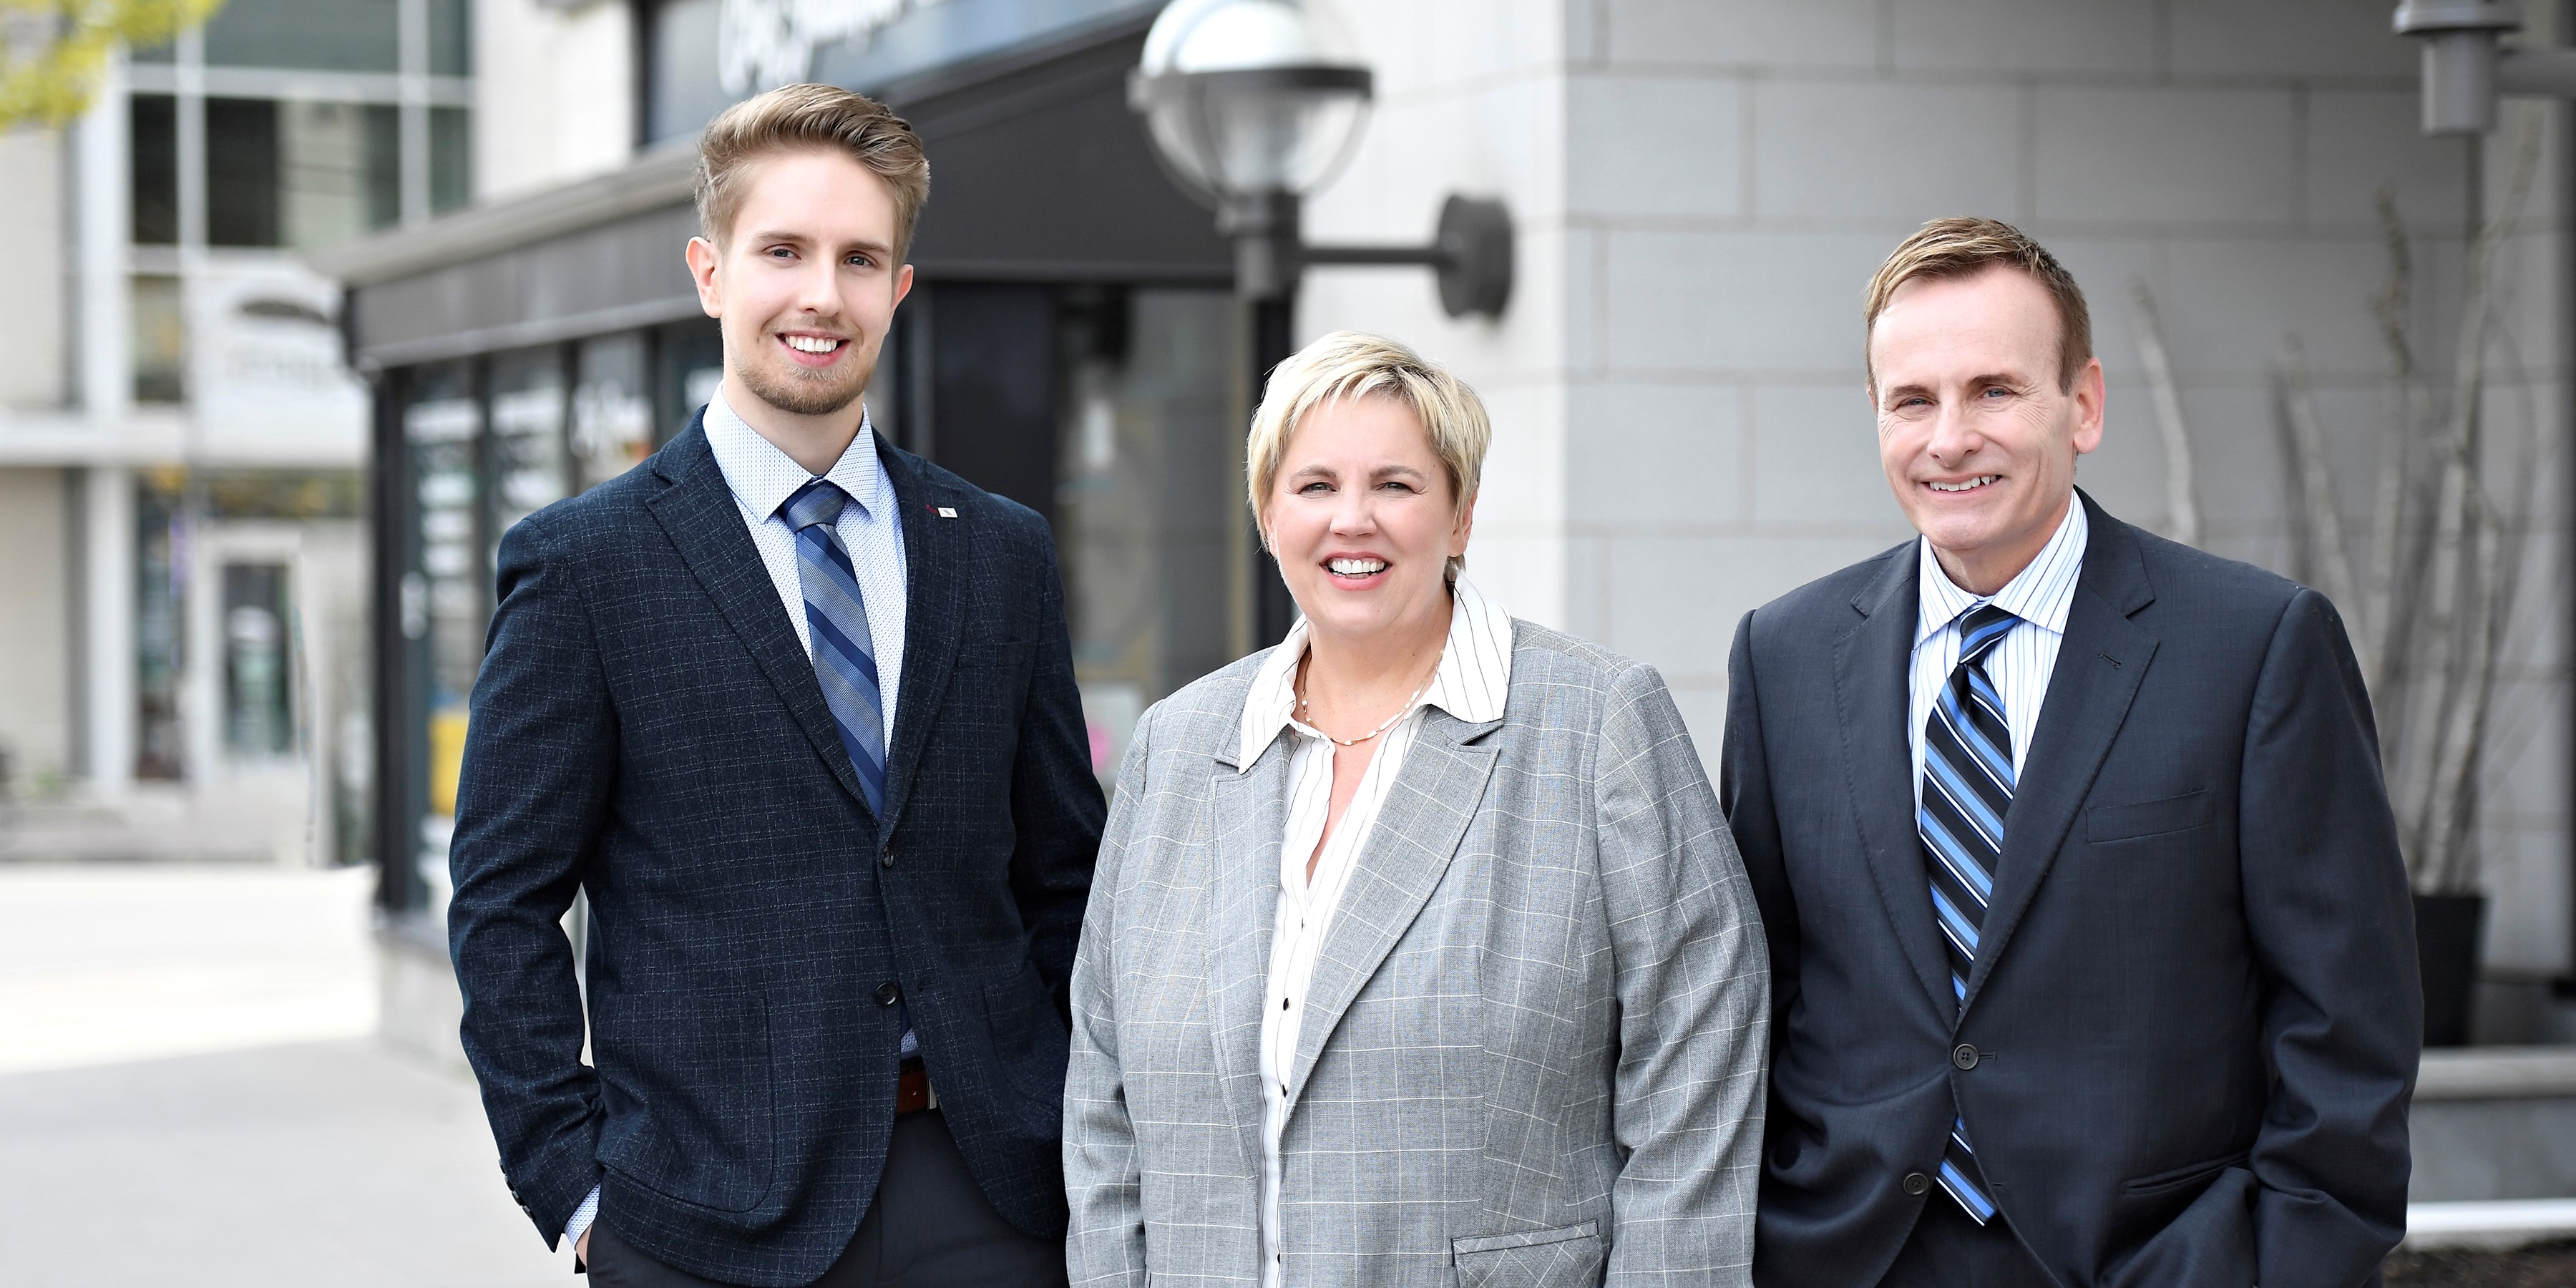 Chilvers Financial Planning Team